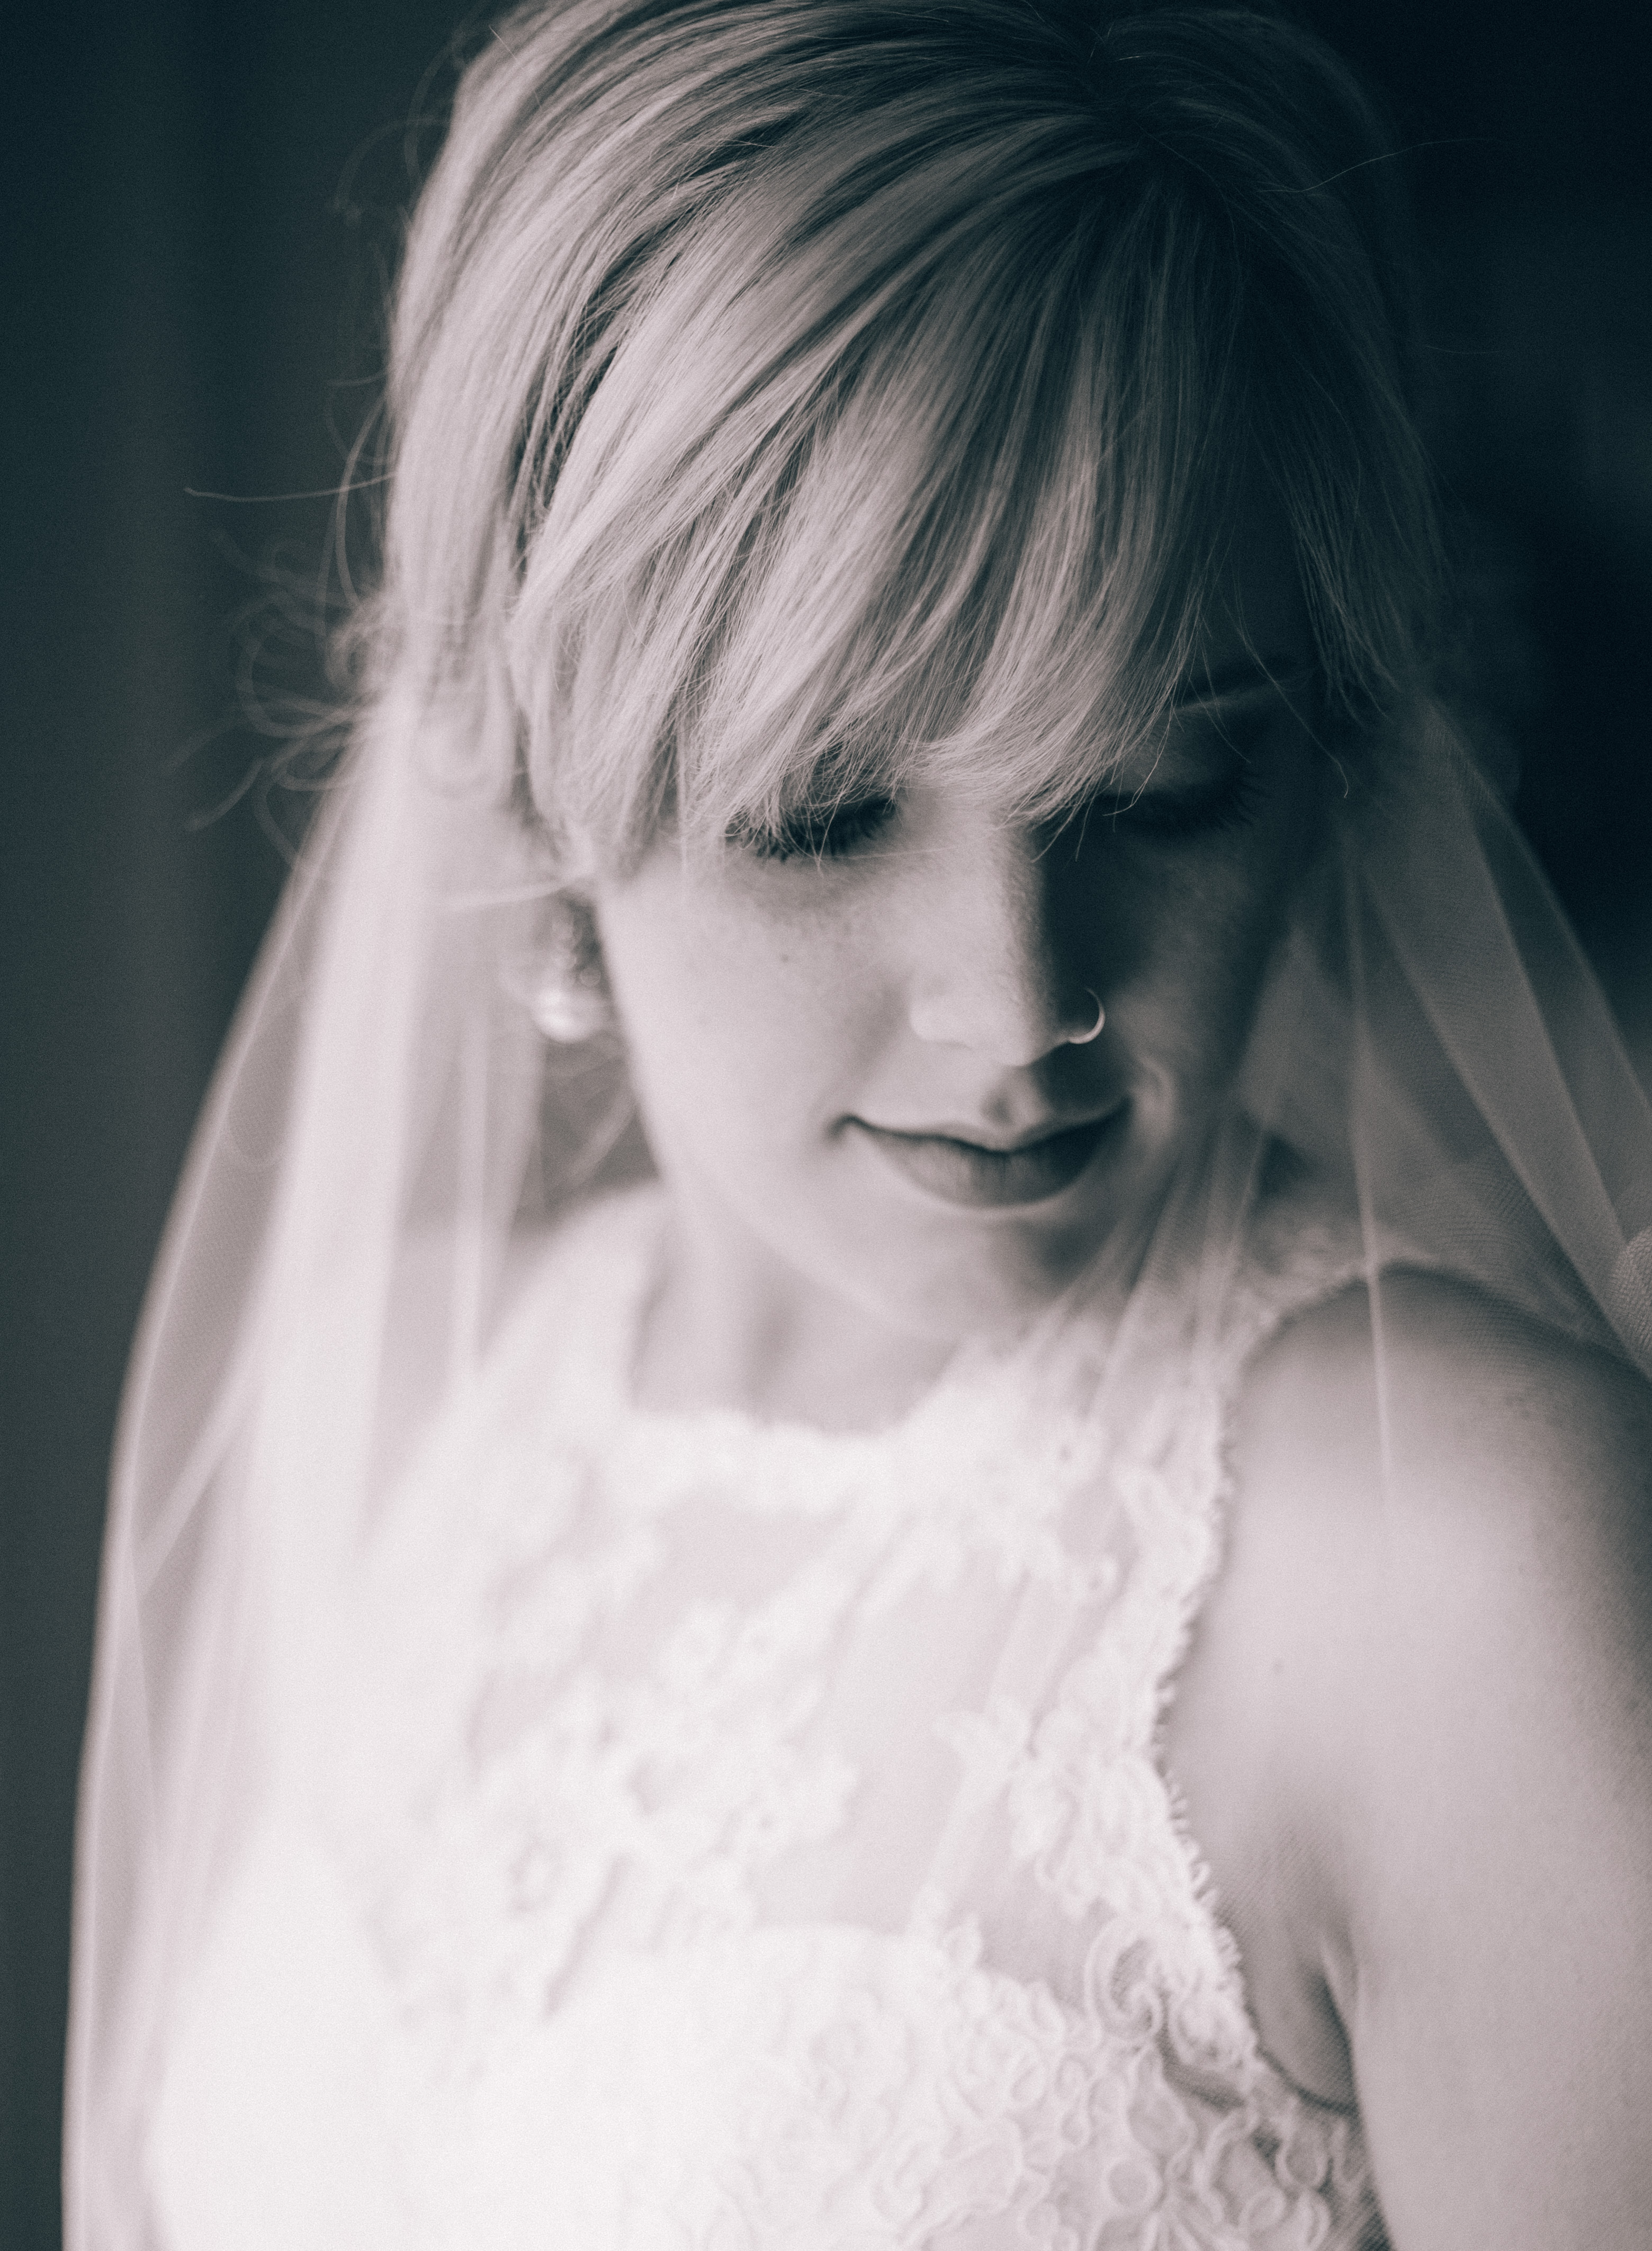 Black and white image of blonde bride with long bangs and classic hairstyle wearing pearl earrings and low set veil